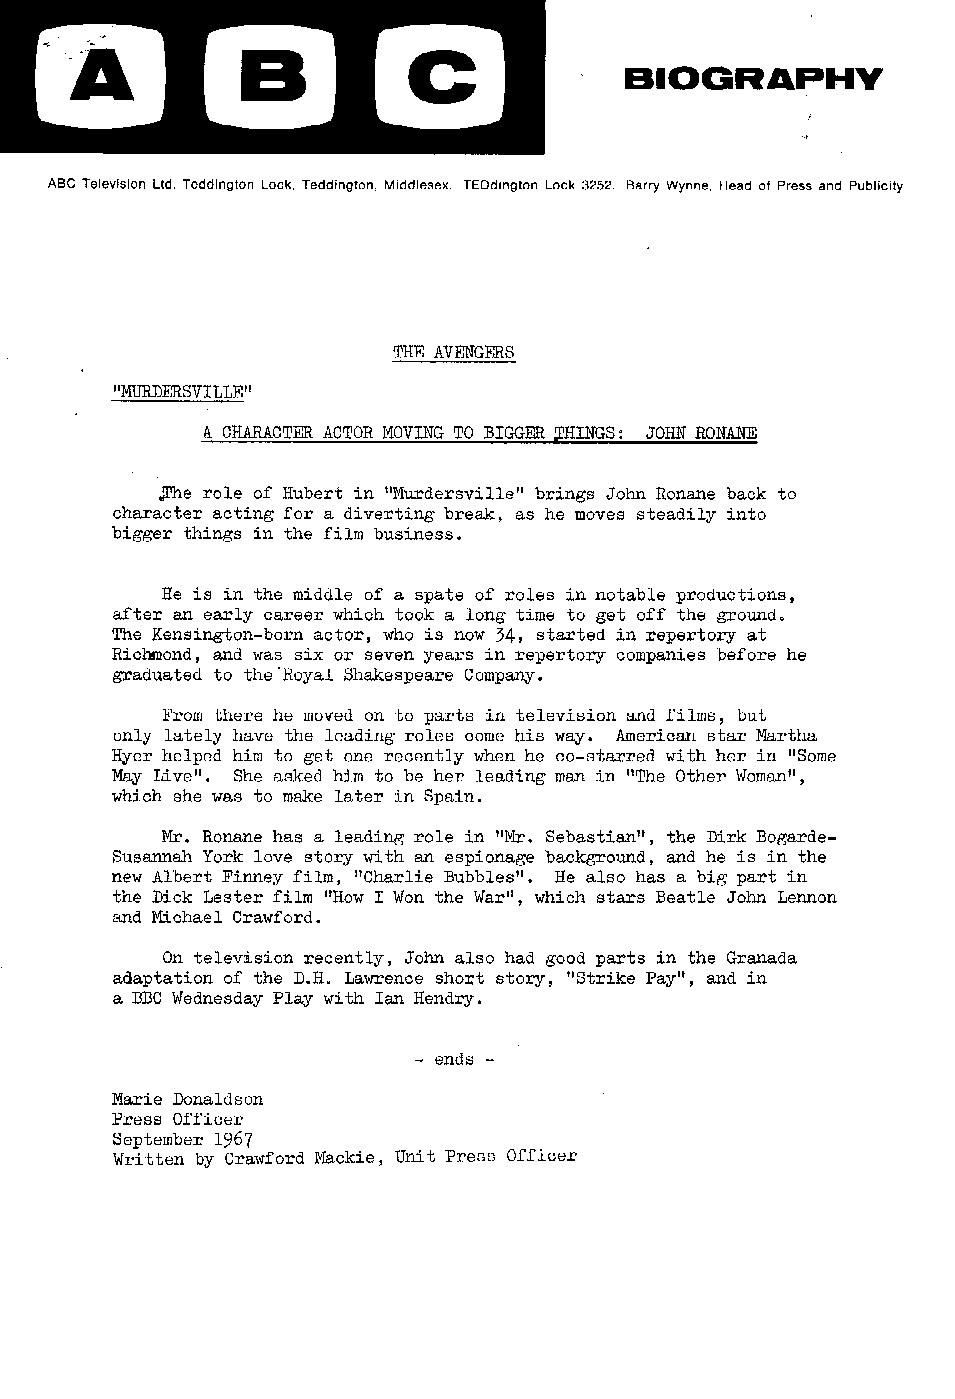 The Avengers - Murdersville press release - page three